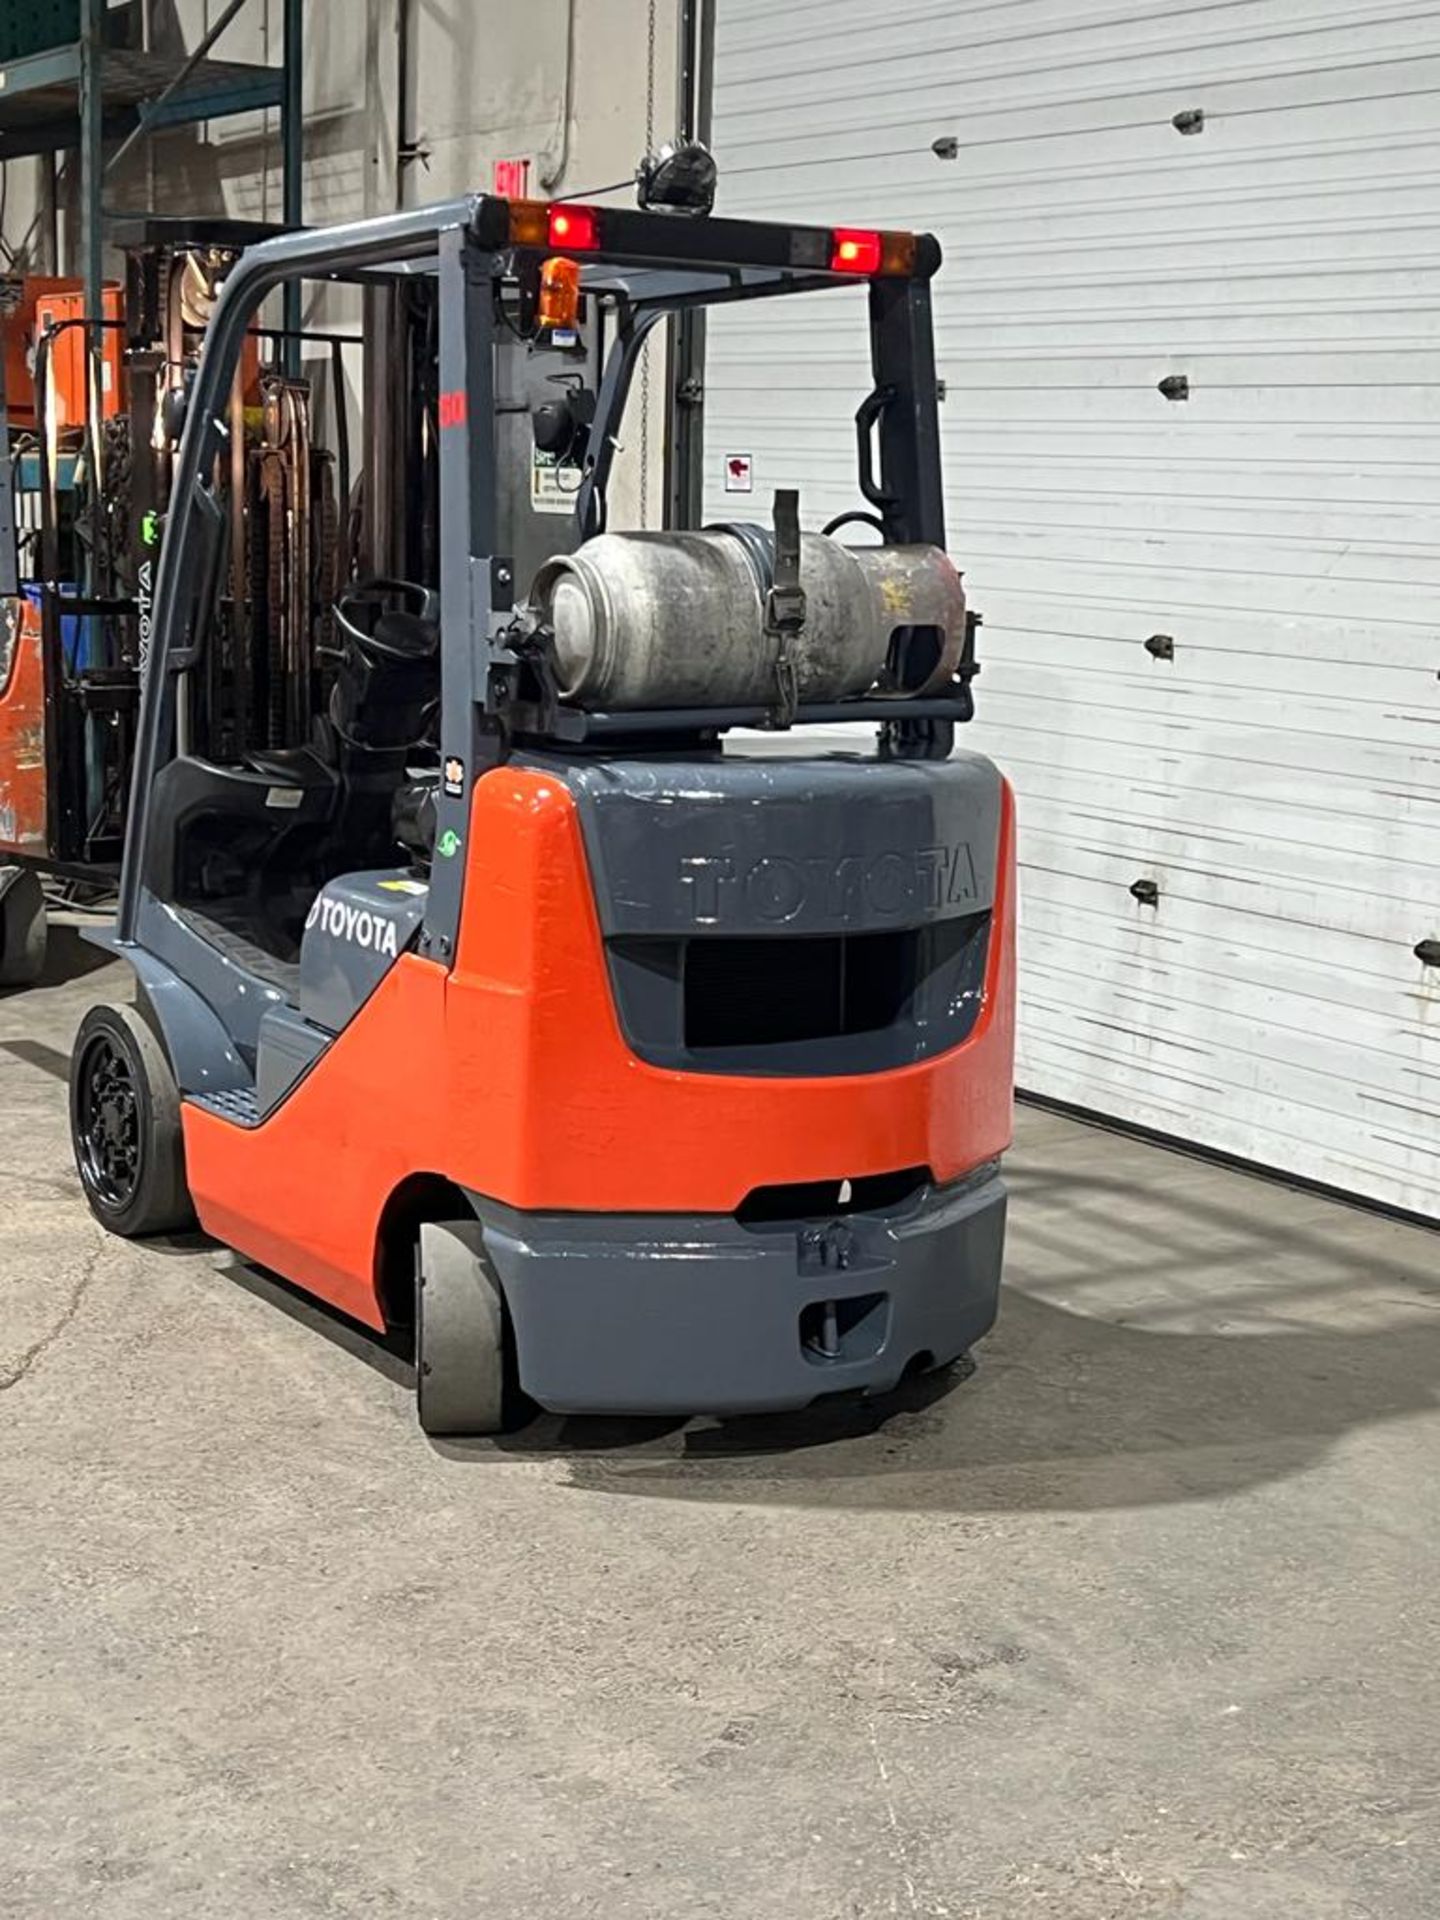 2014 Toyota 5,000lbs Capacity Forklift LPG (propane) with sideshift and 3-STAGE MAST (no propane - Image 4 of 4